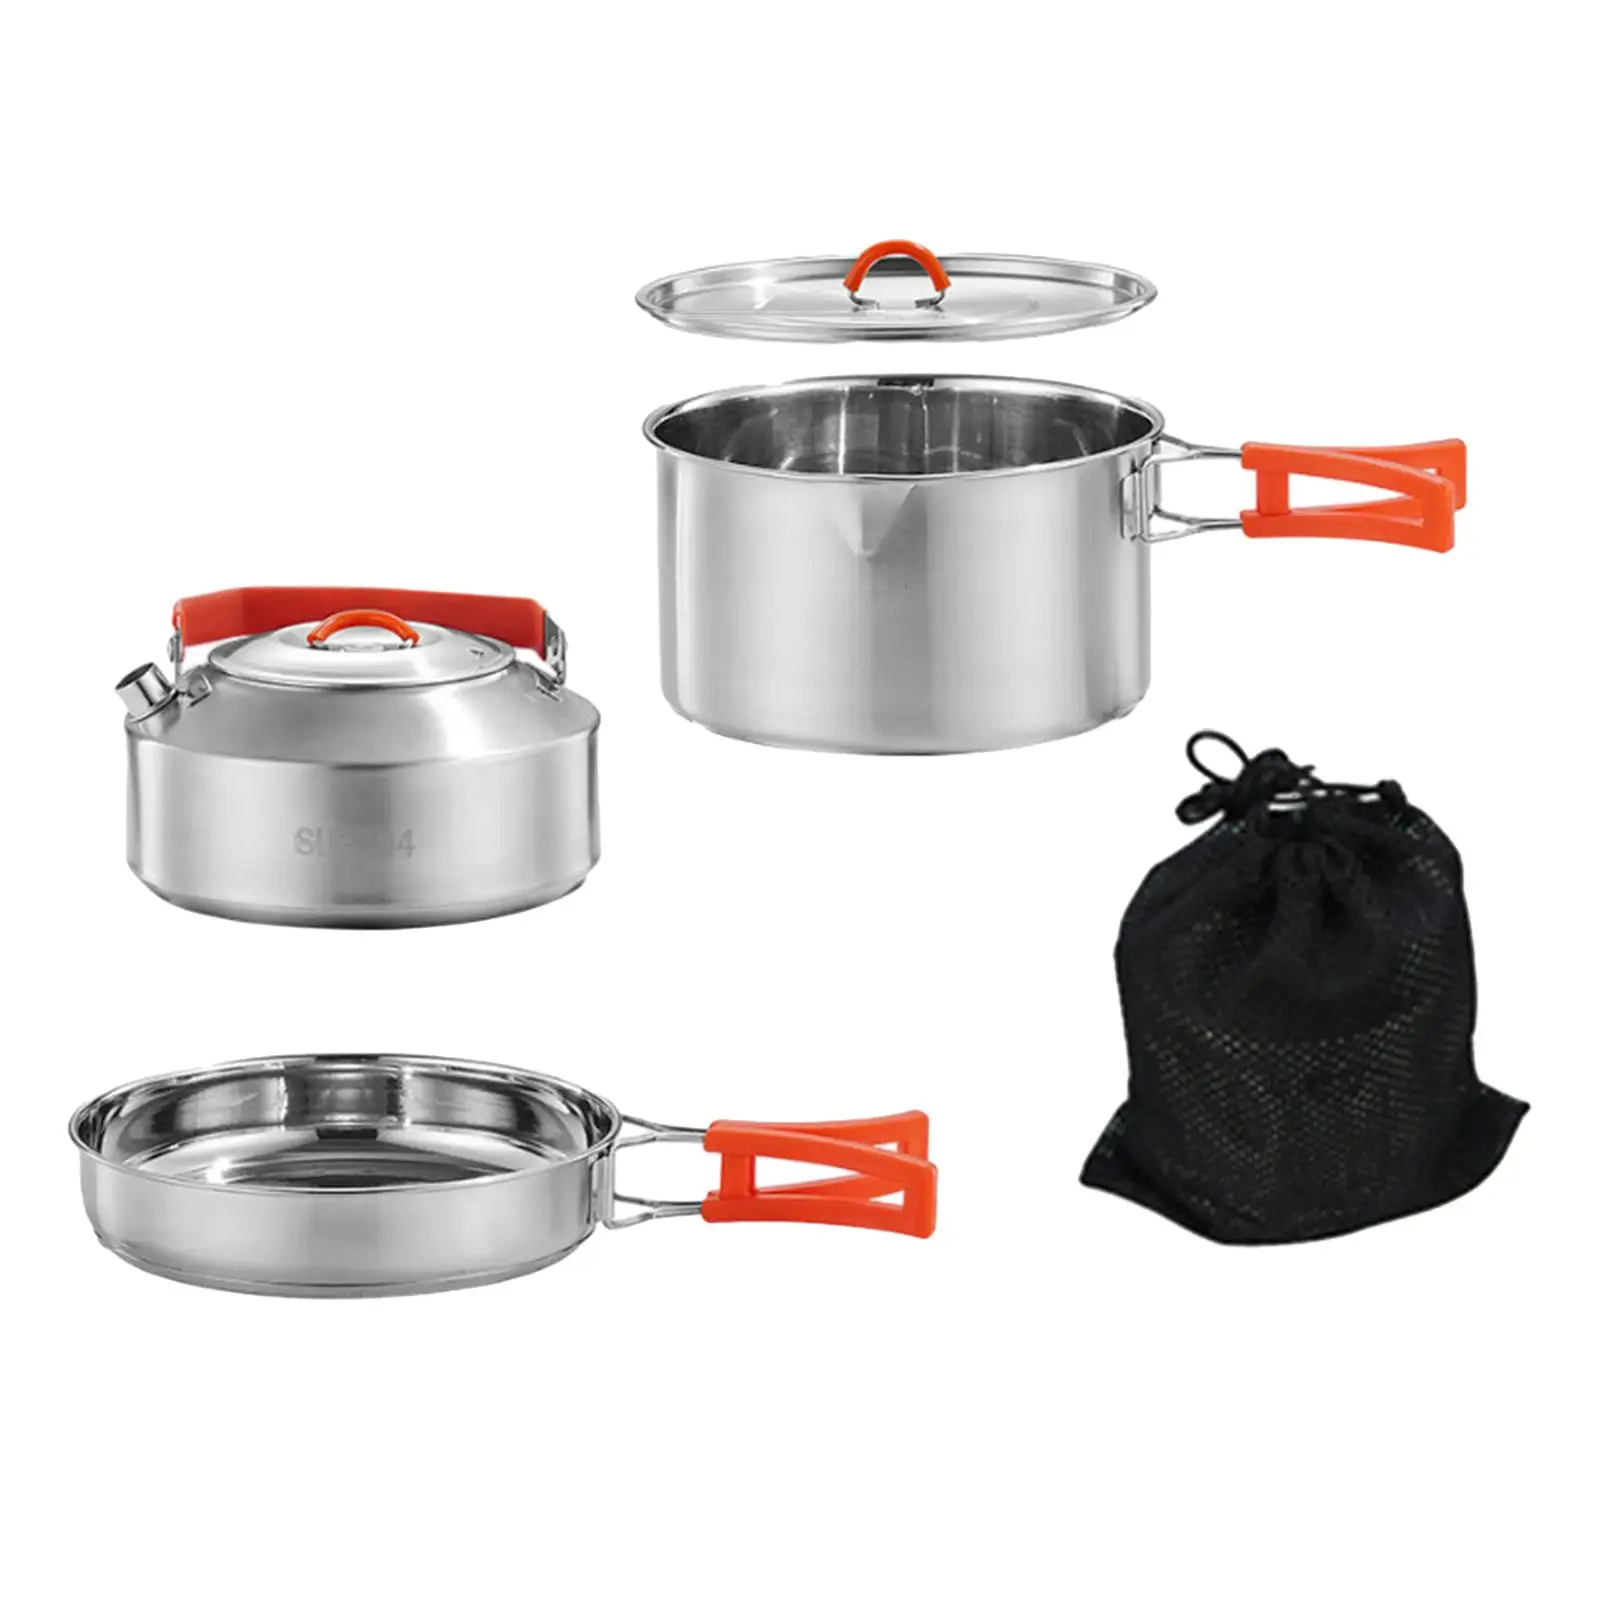 Camping Cookware, Compact/Lightweight/Durable Camping Pot and Pan Set, Camping Cooking Set, Included Mesh Carry Bag